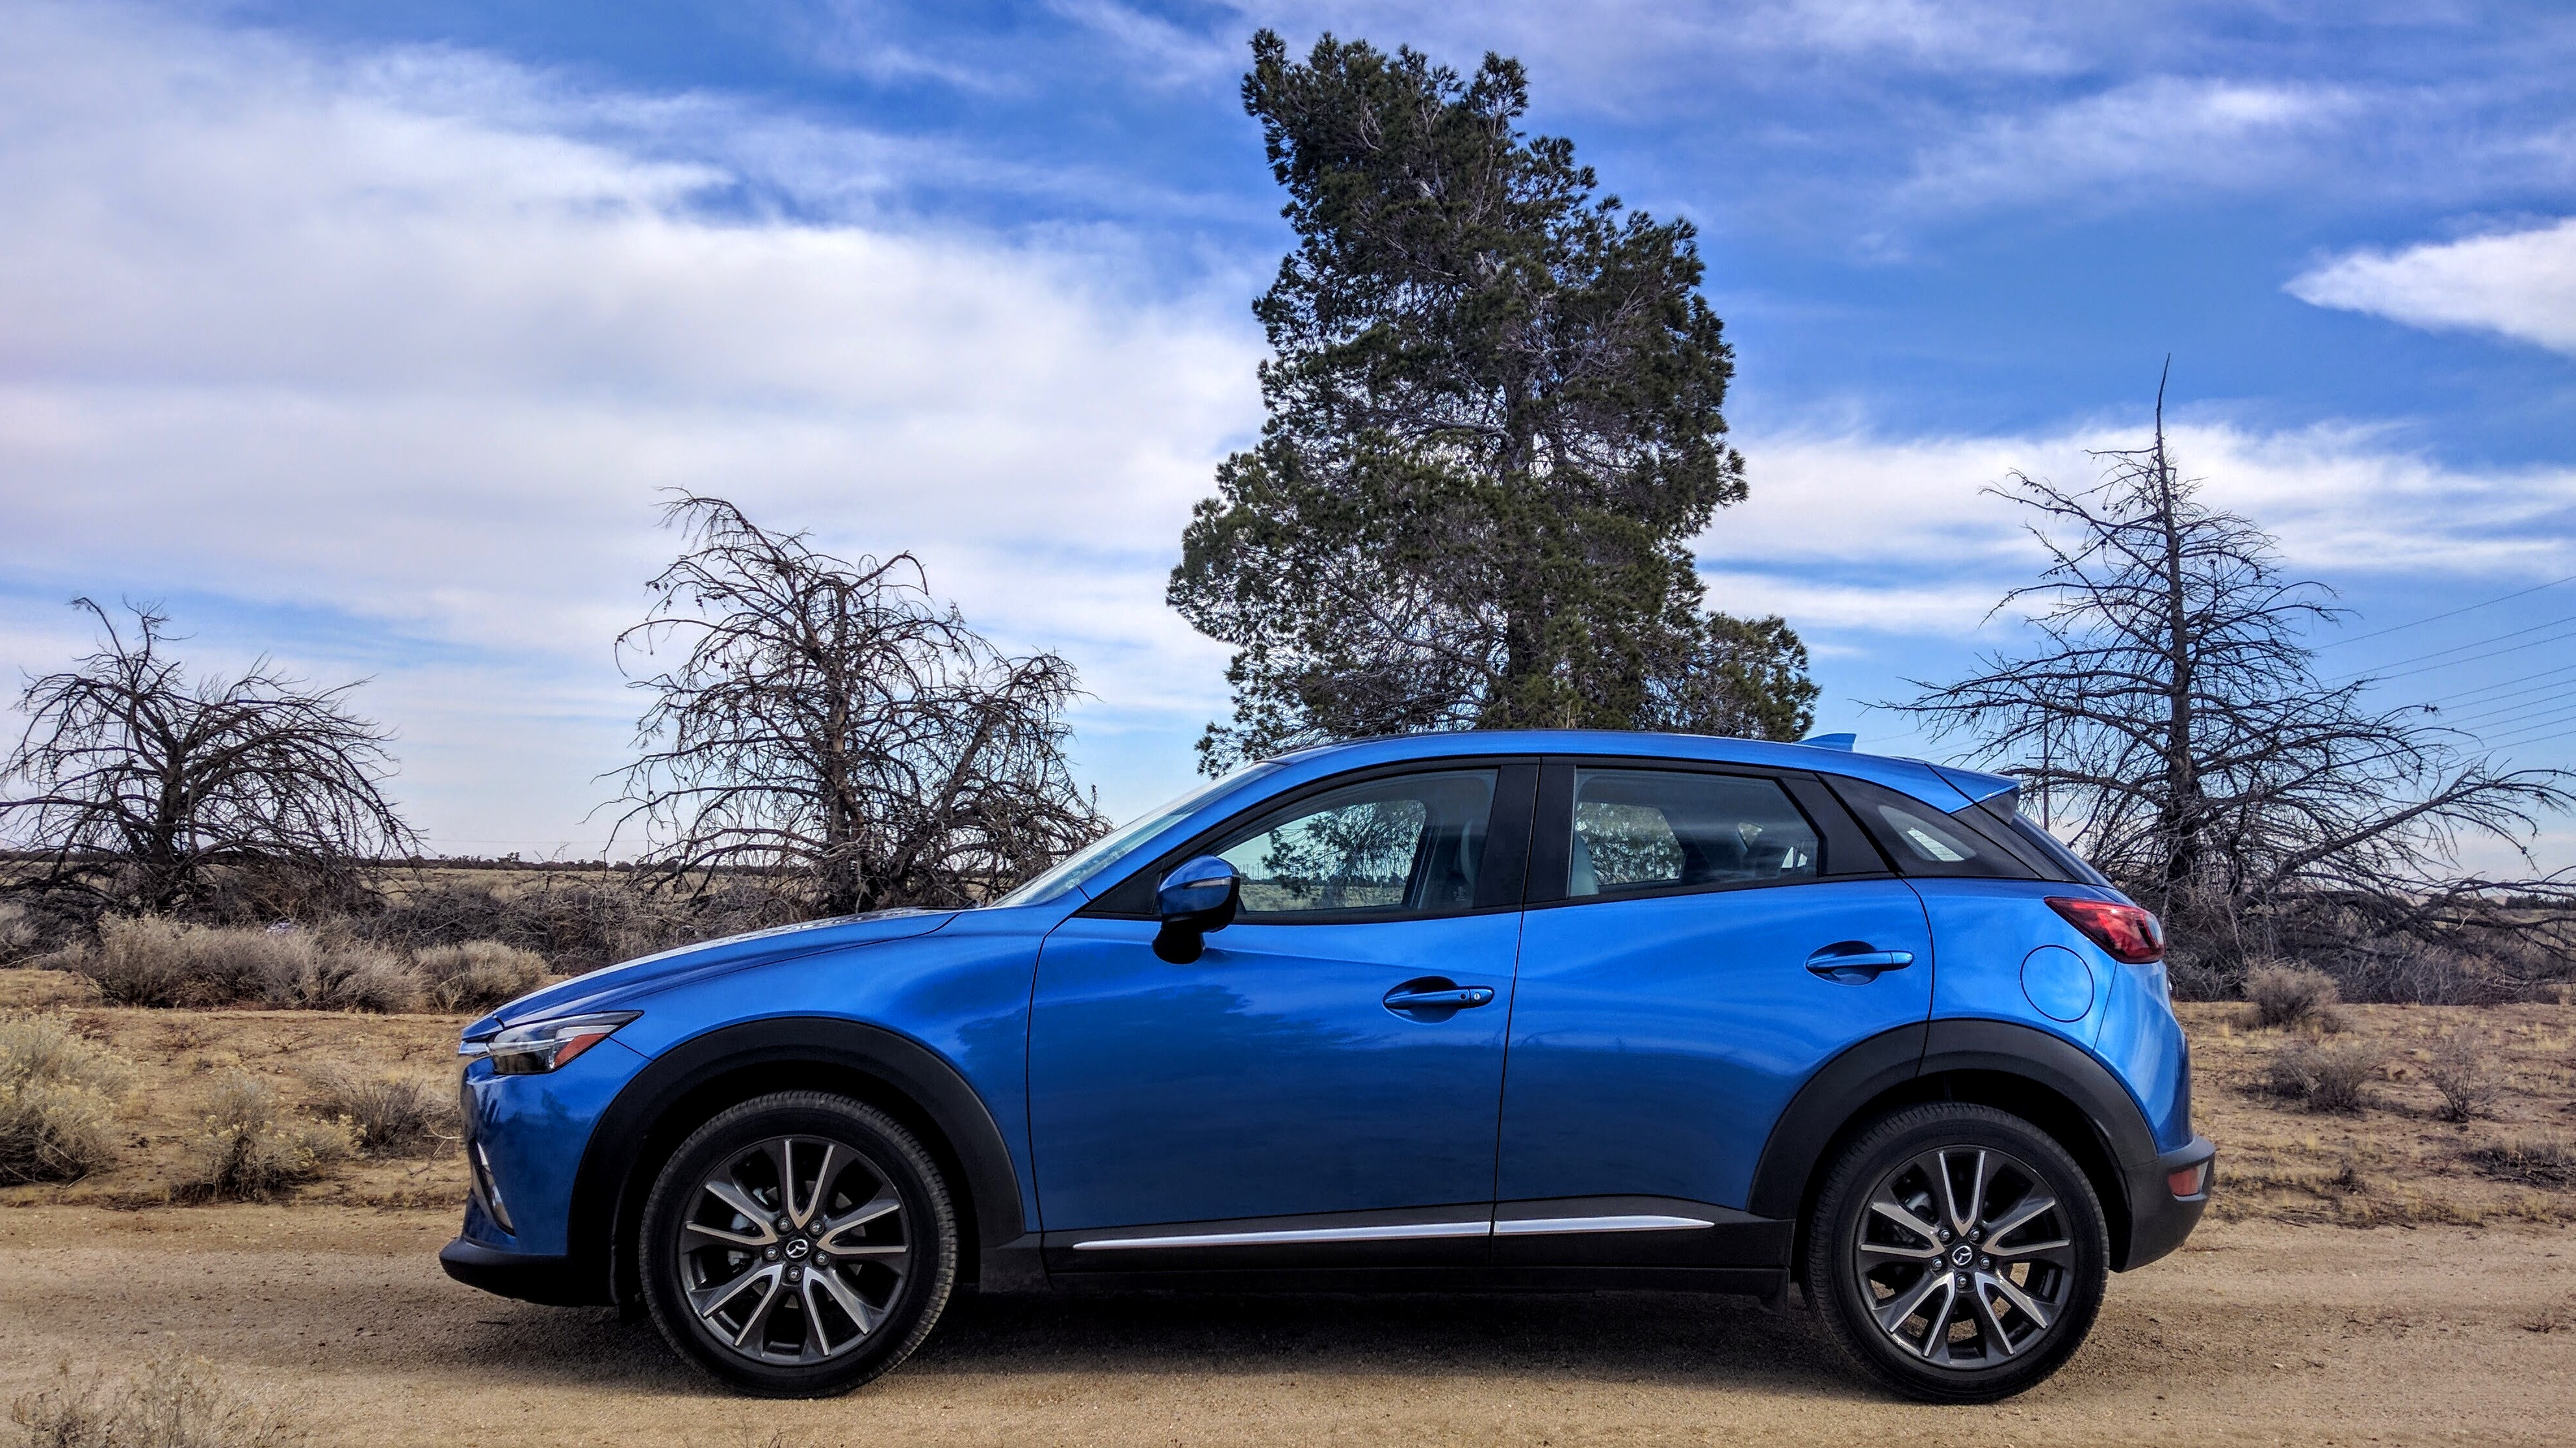 2017 Mazda CX-3 : Keeping It Compact - The Ignition Blog